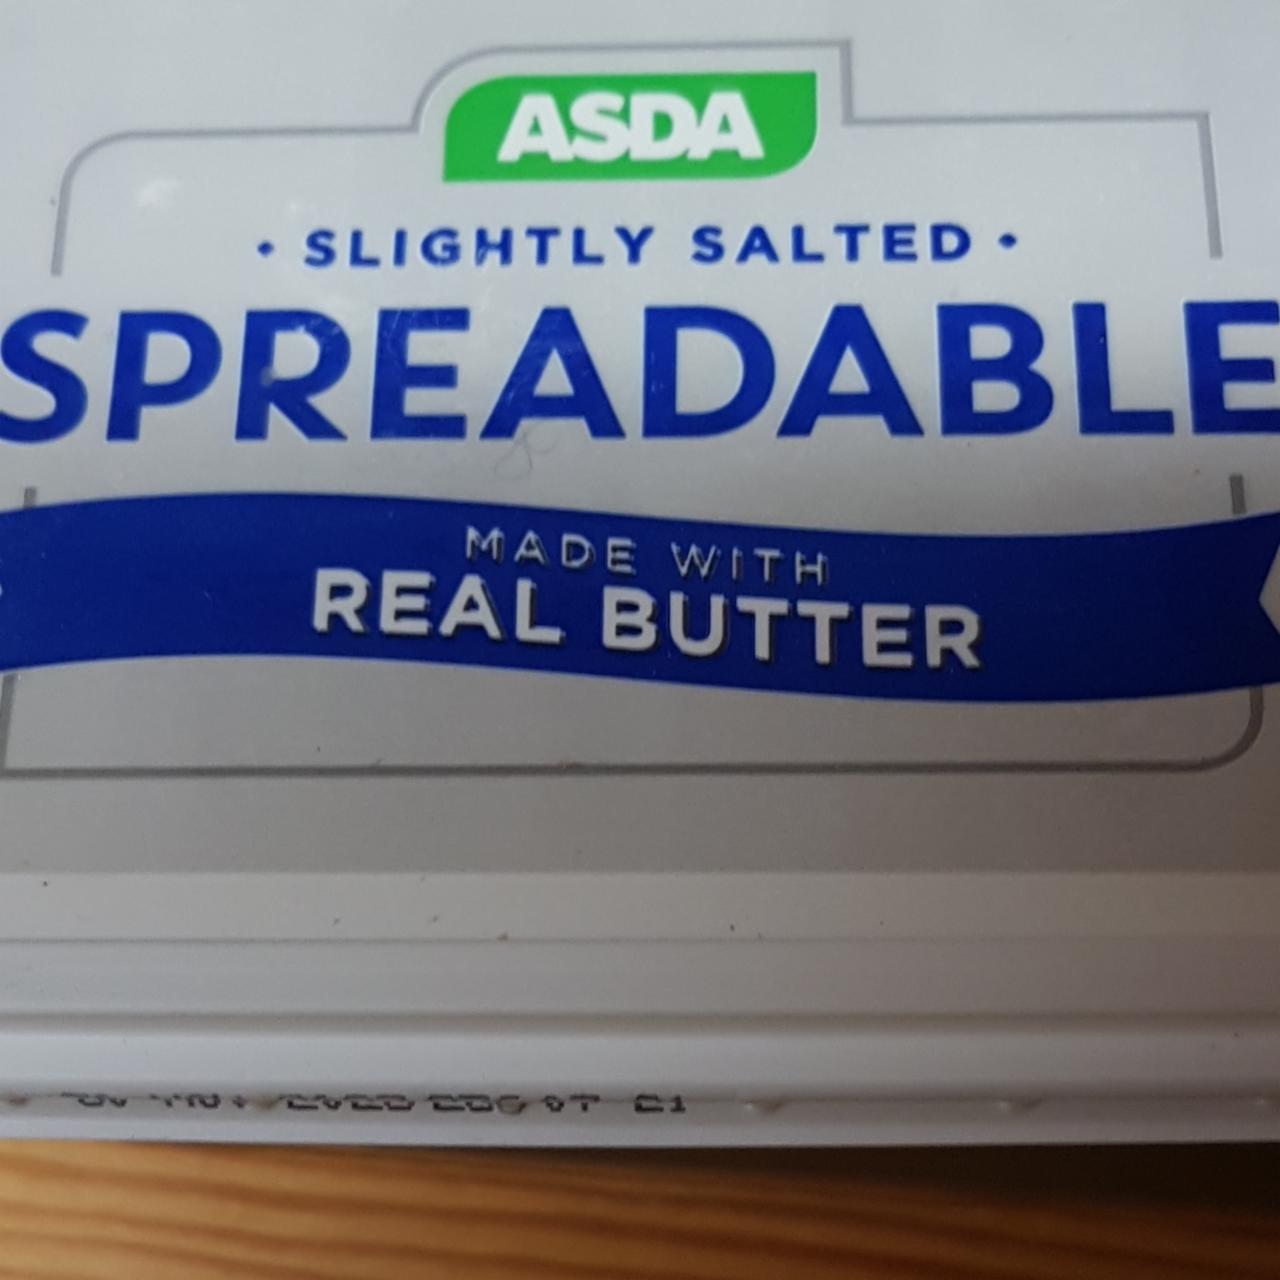 Fotografie - Slightly salted Spreadable with Real Butter Asda